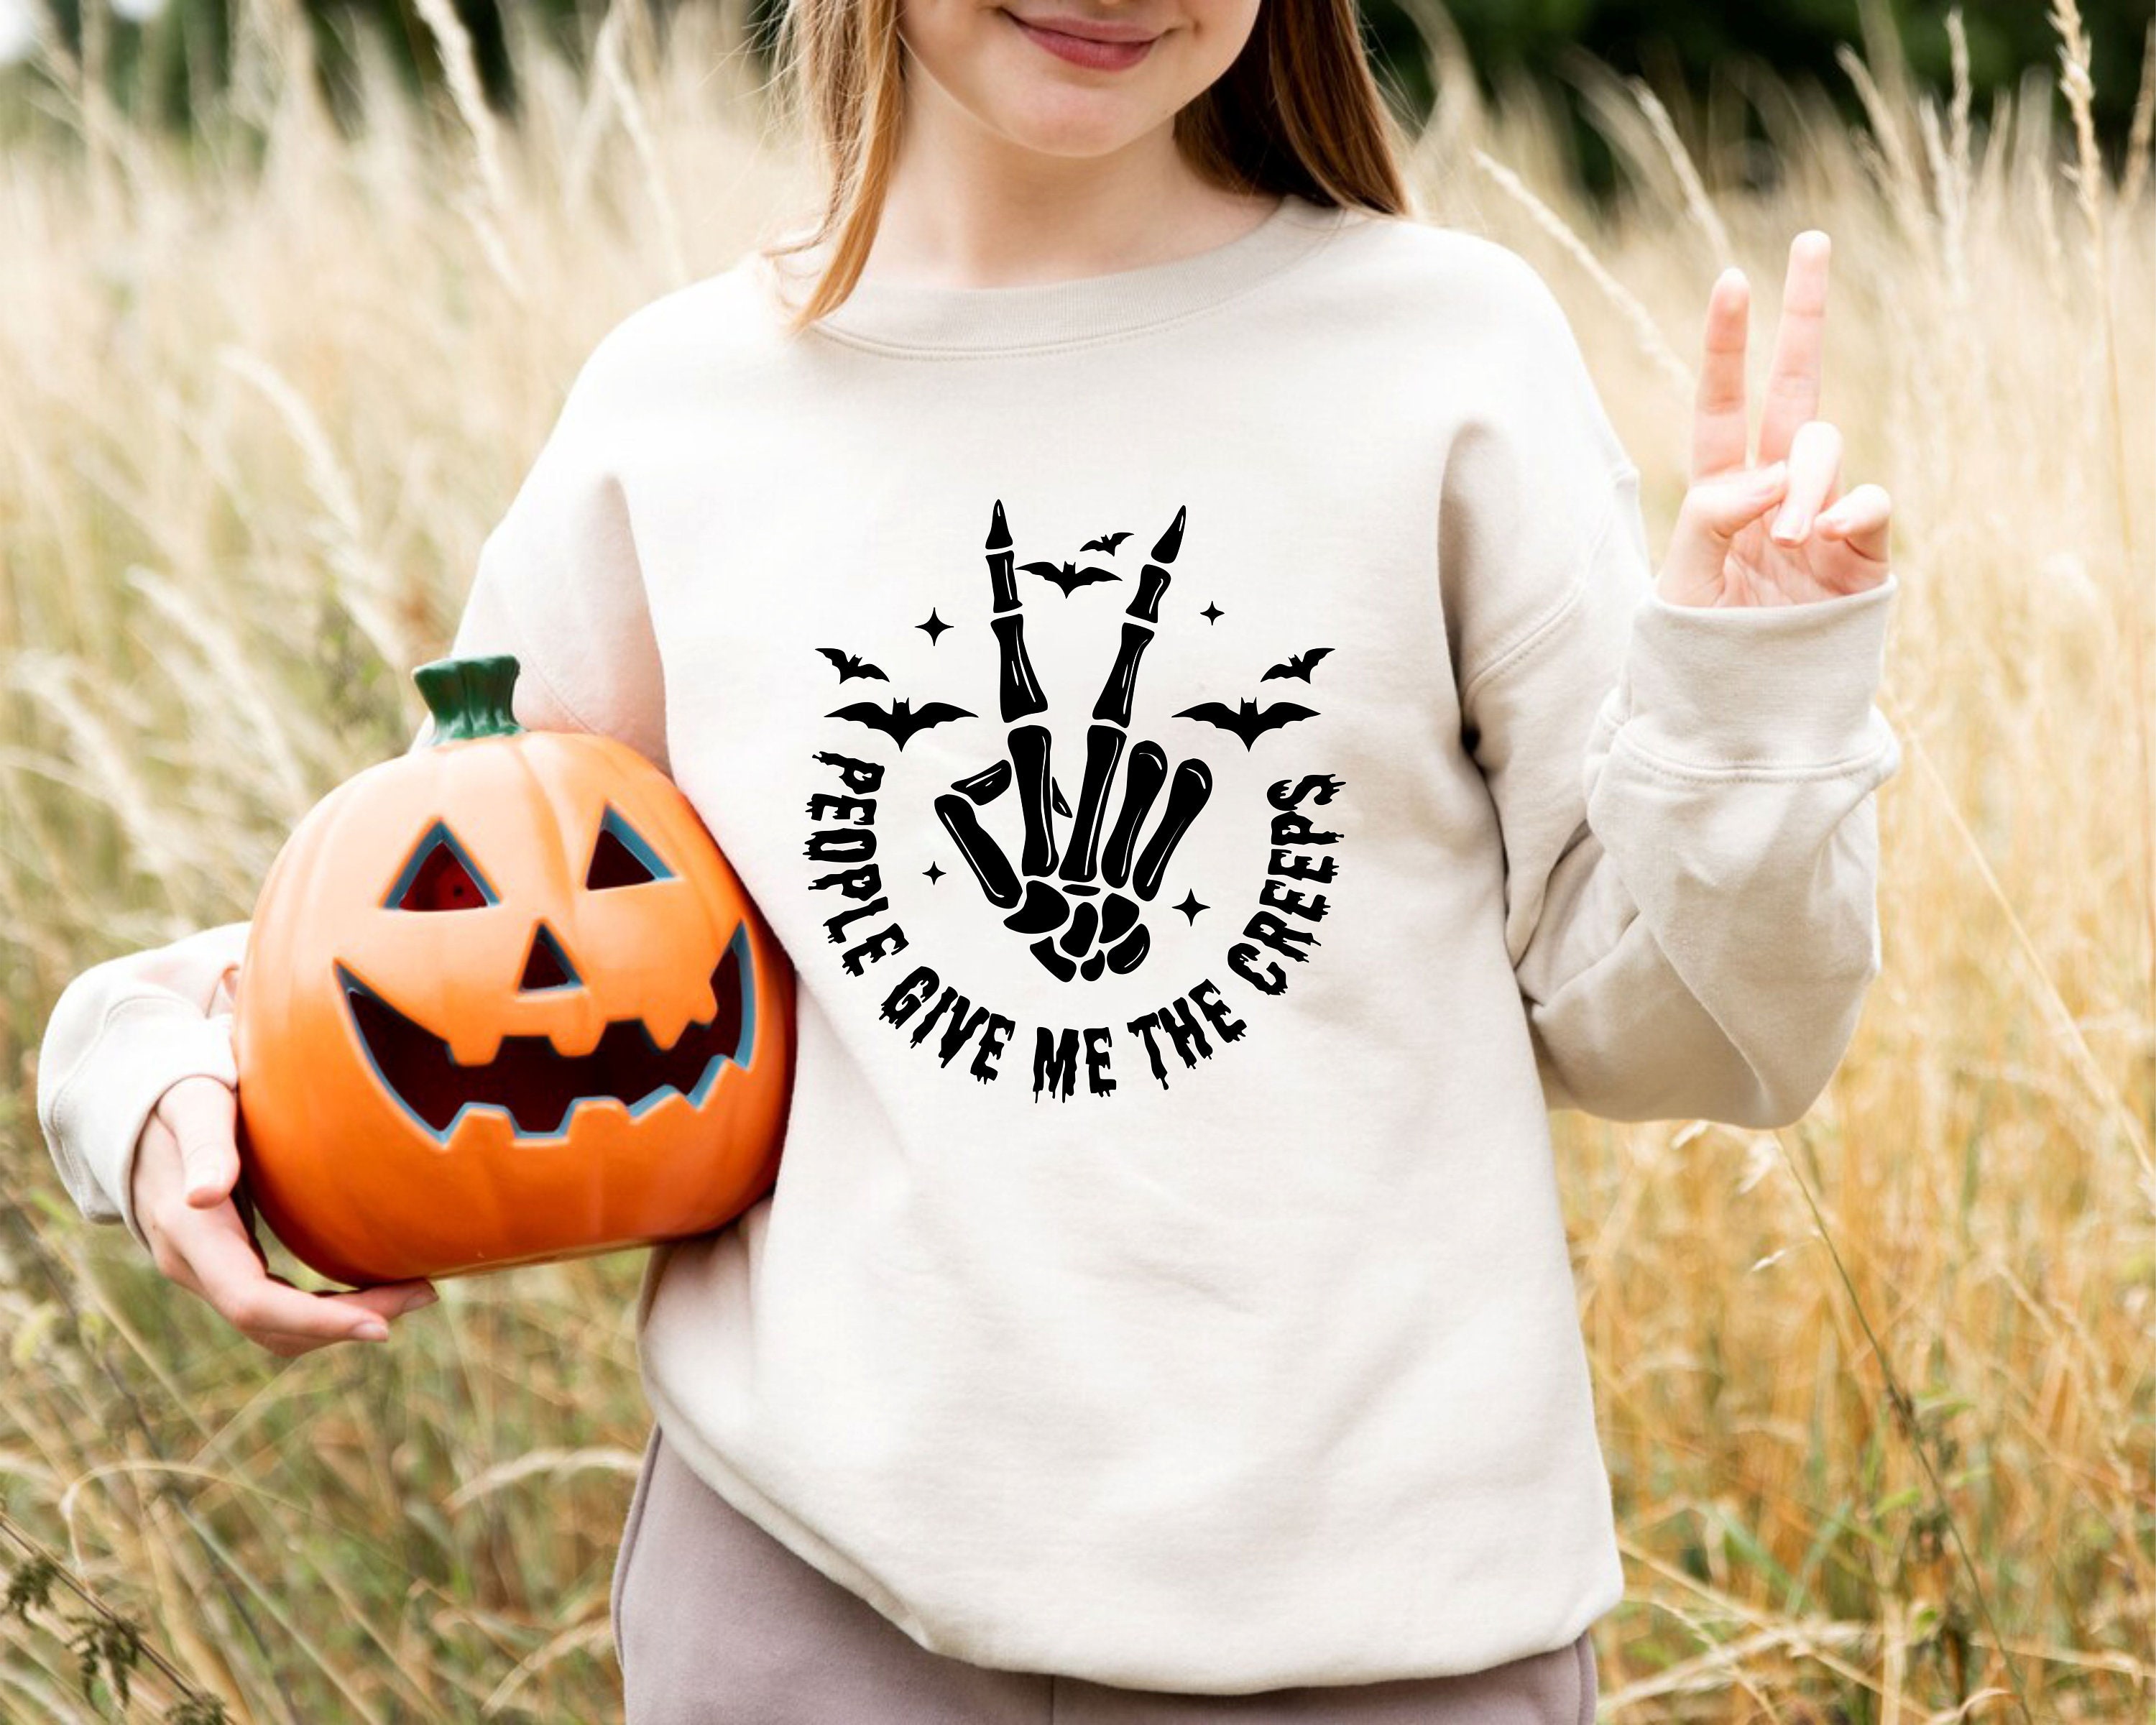 Discover People Give Me The Creeps Sweatshirt, Skeleton Hands, Peace Symbol, Scary Season Sweater, Bats Motif, Spooky Design, Witchy Halloween Spirit